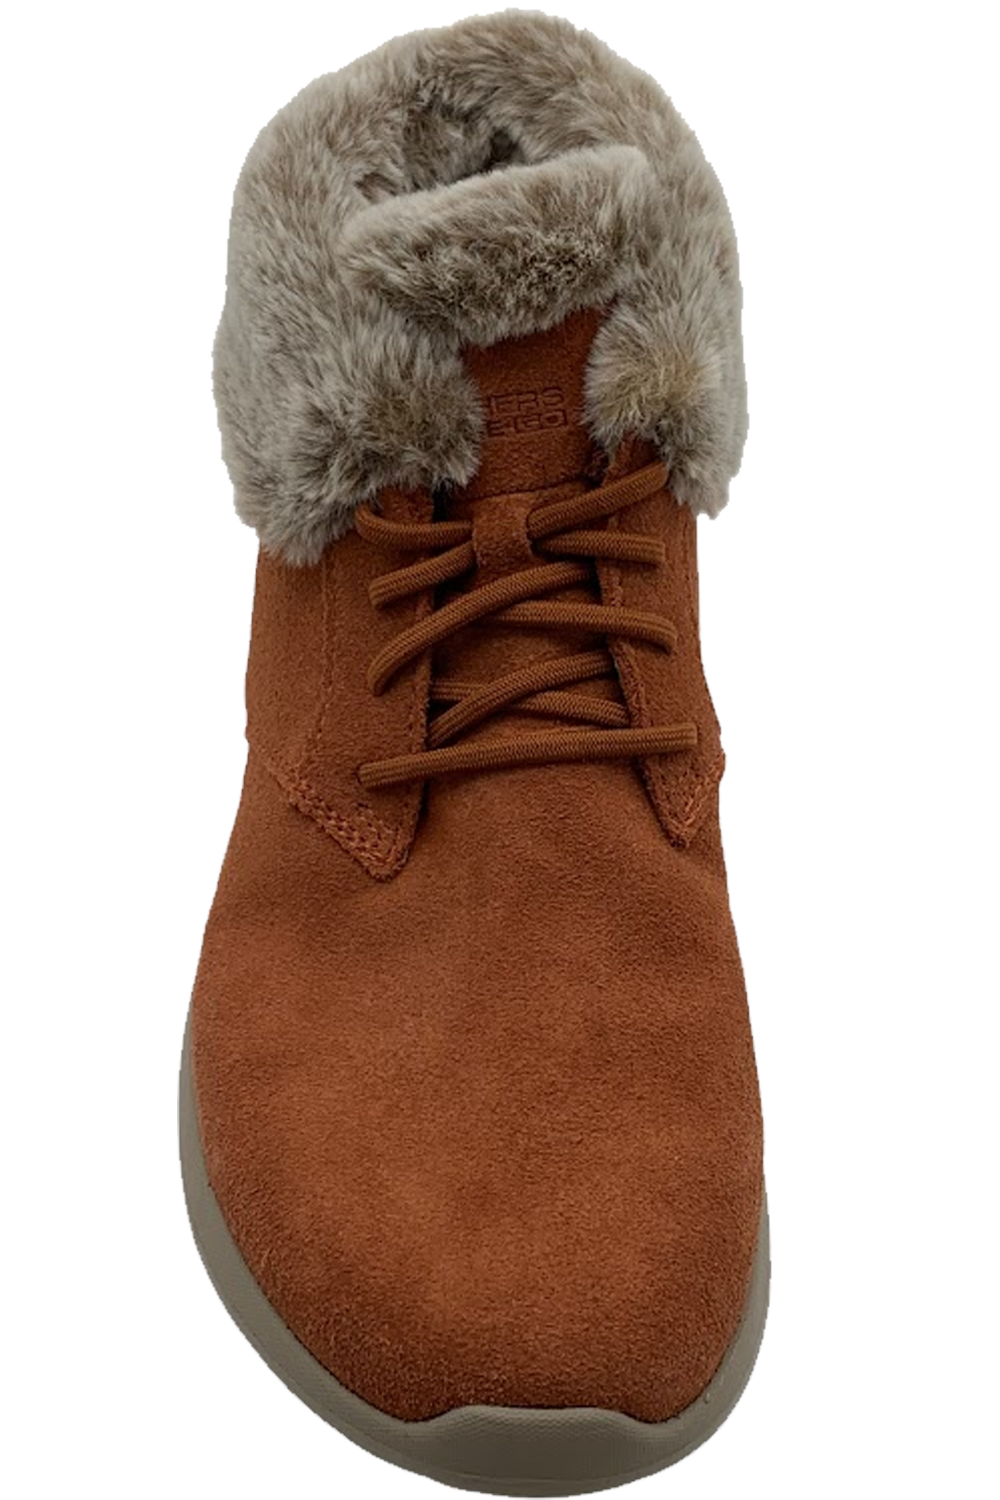 Skechers On the GO City 2 Suede Ankle Boots Winter Wishes Rust | Jender